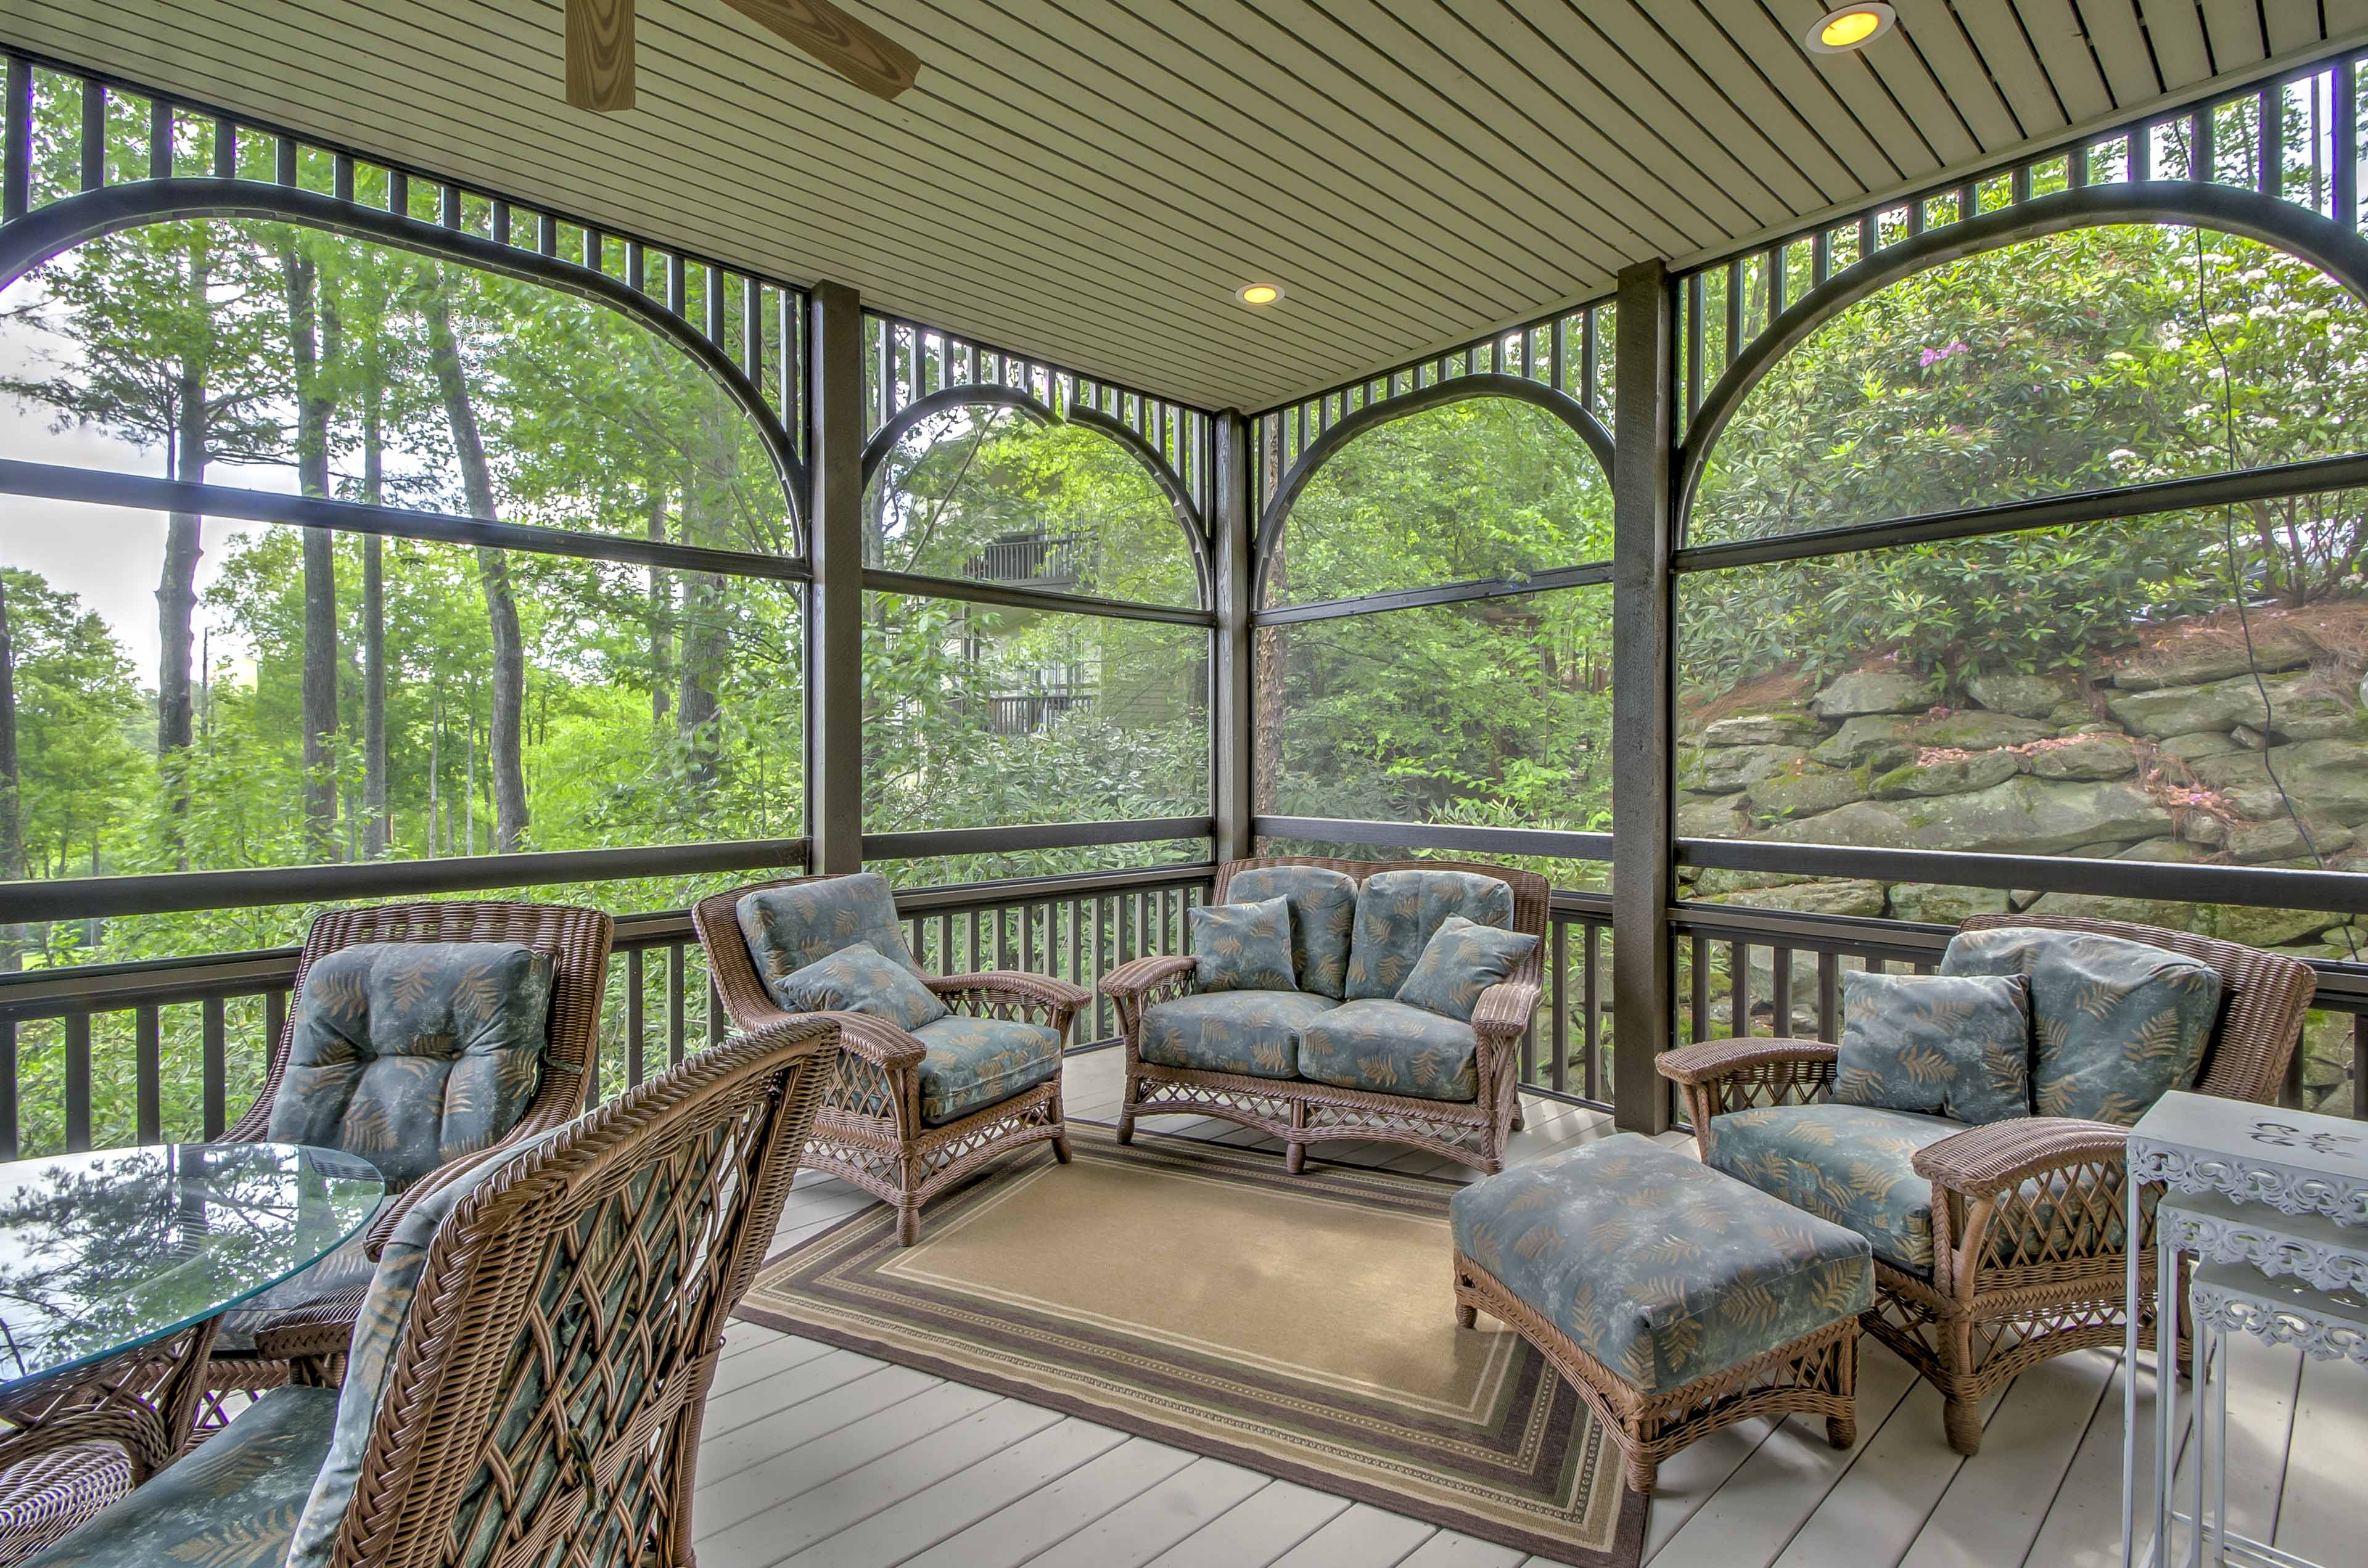 The condo features a spacious screened-in porch with plenty of comfortable furniture.